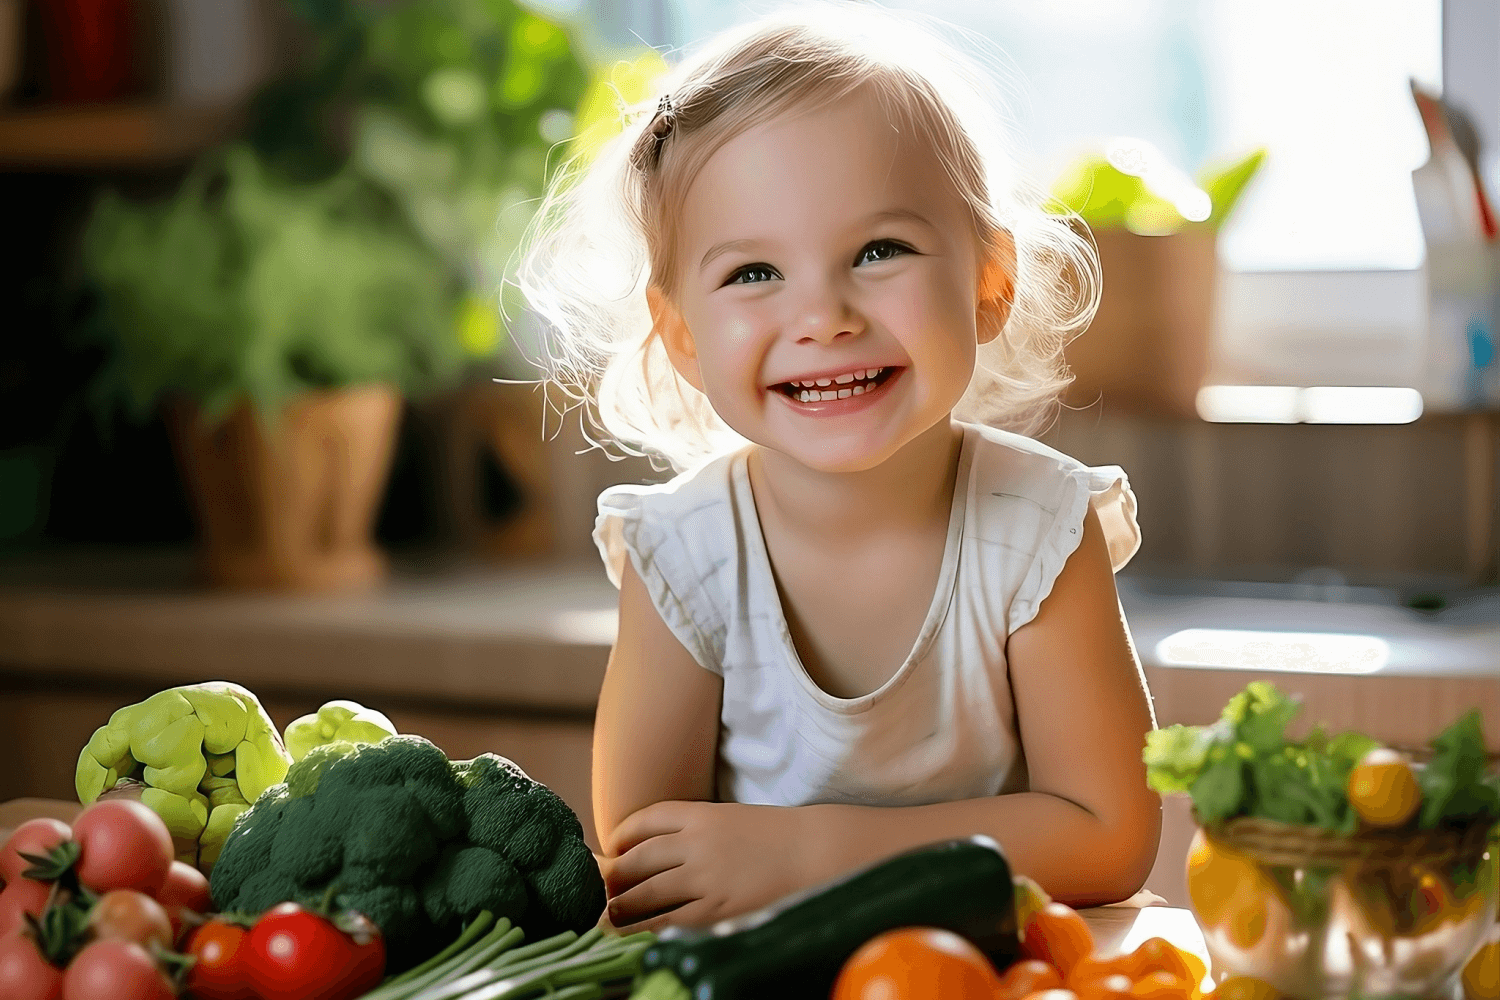 A Child Eating Healthy Food, Illustrating How To Prevent Tooth Decay Through Diet And Oral Hygiene